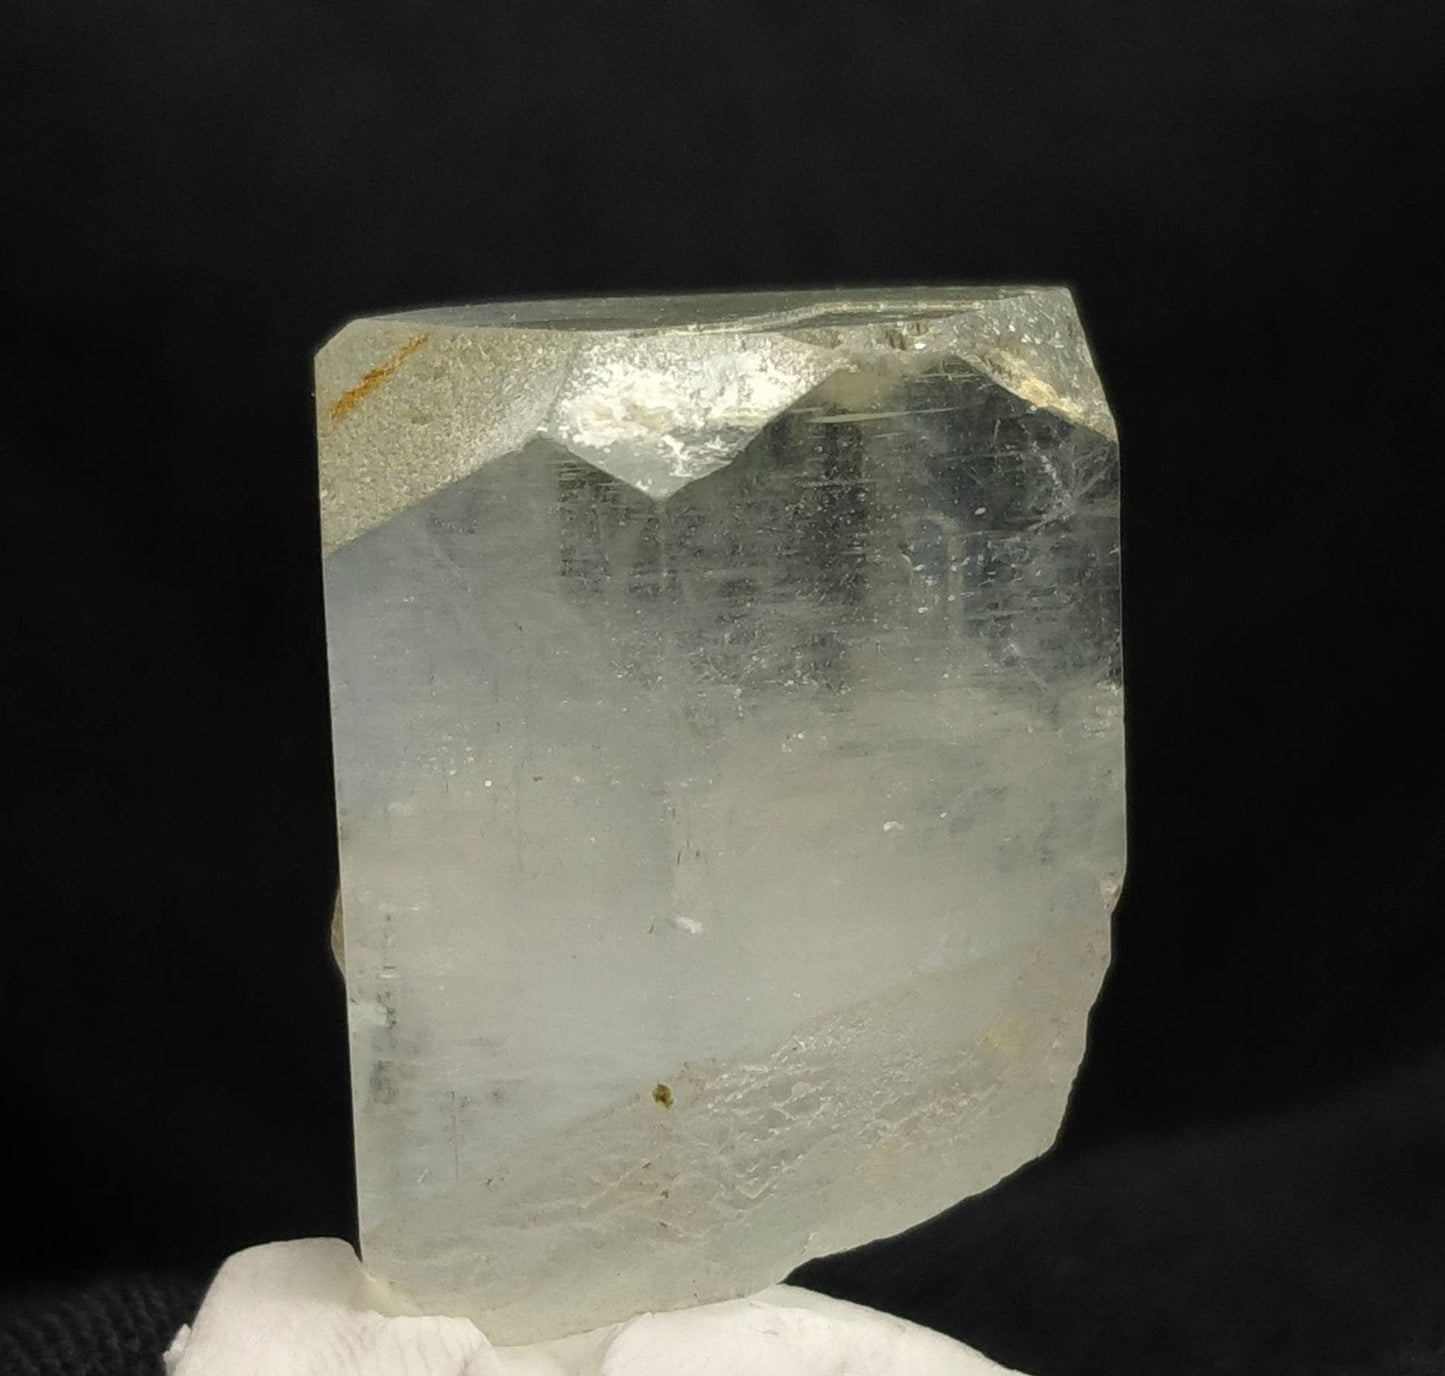 ARSAA GEMS AND MINERALSTop Quality beautiful natural 23.1 grams terminated Aquamarine crystal - Premium  from ARSAA GEMS AND MINERALS - Just $100.00! Shop now at ARSAA GEMS AND MINERALS